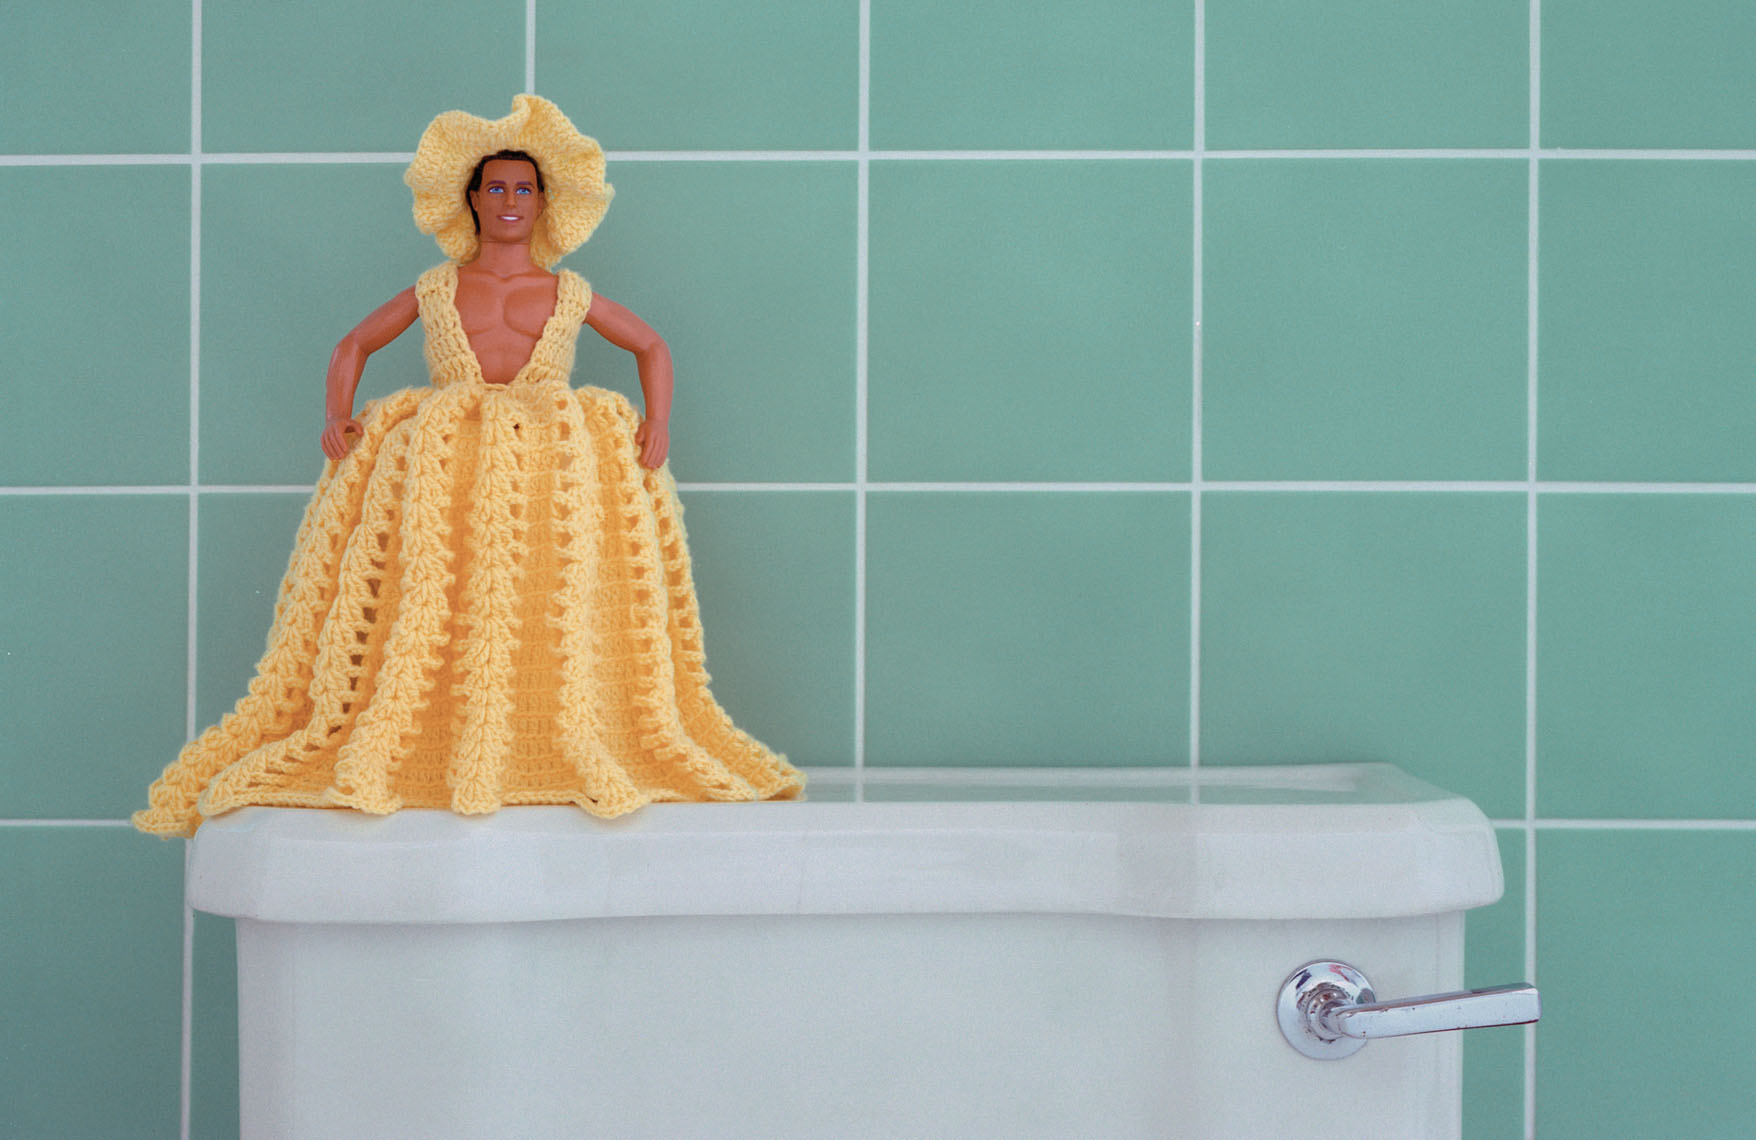 Ken, a toilet holder doll, dressed in a bright yellow crocheted dress and hat.